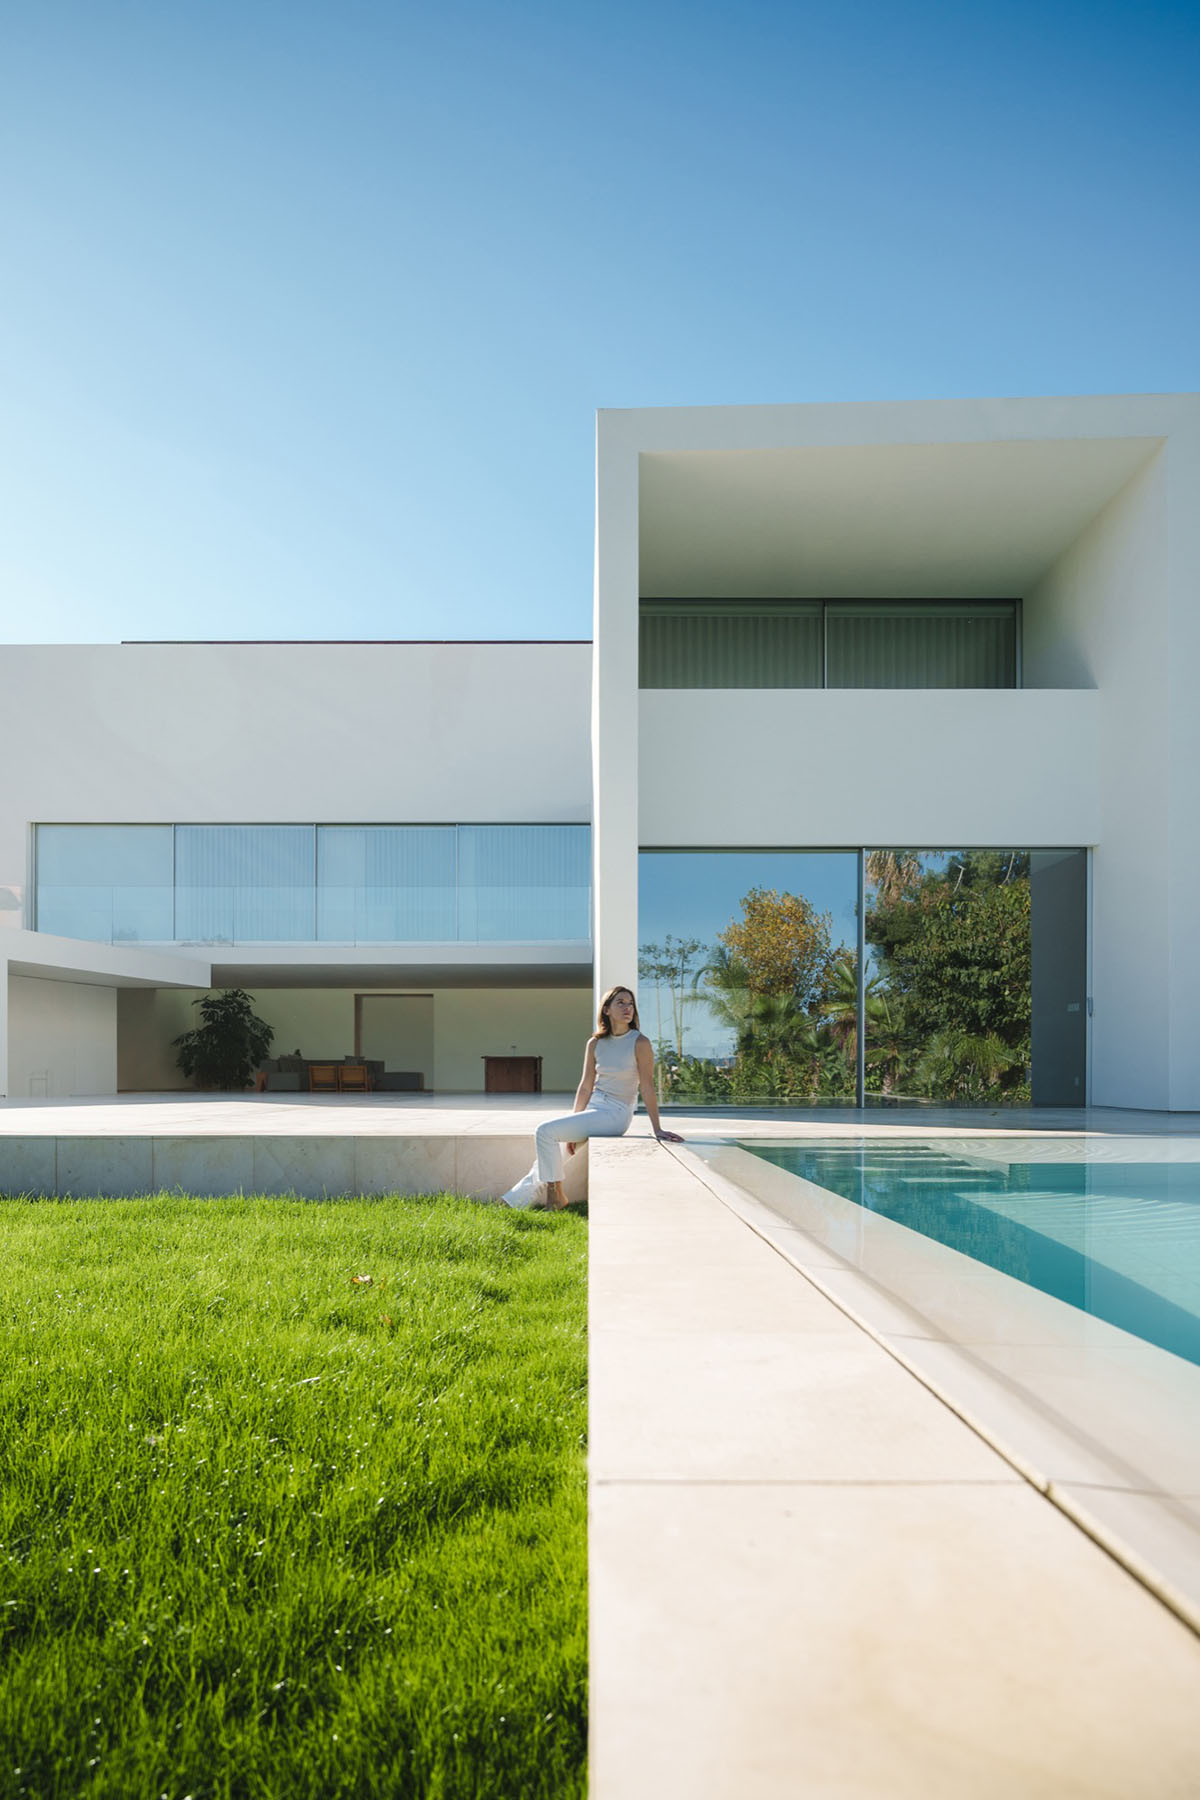 The Empty House by Fran Silvestre Arquitectos complements existing building with two wings in Spain